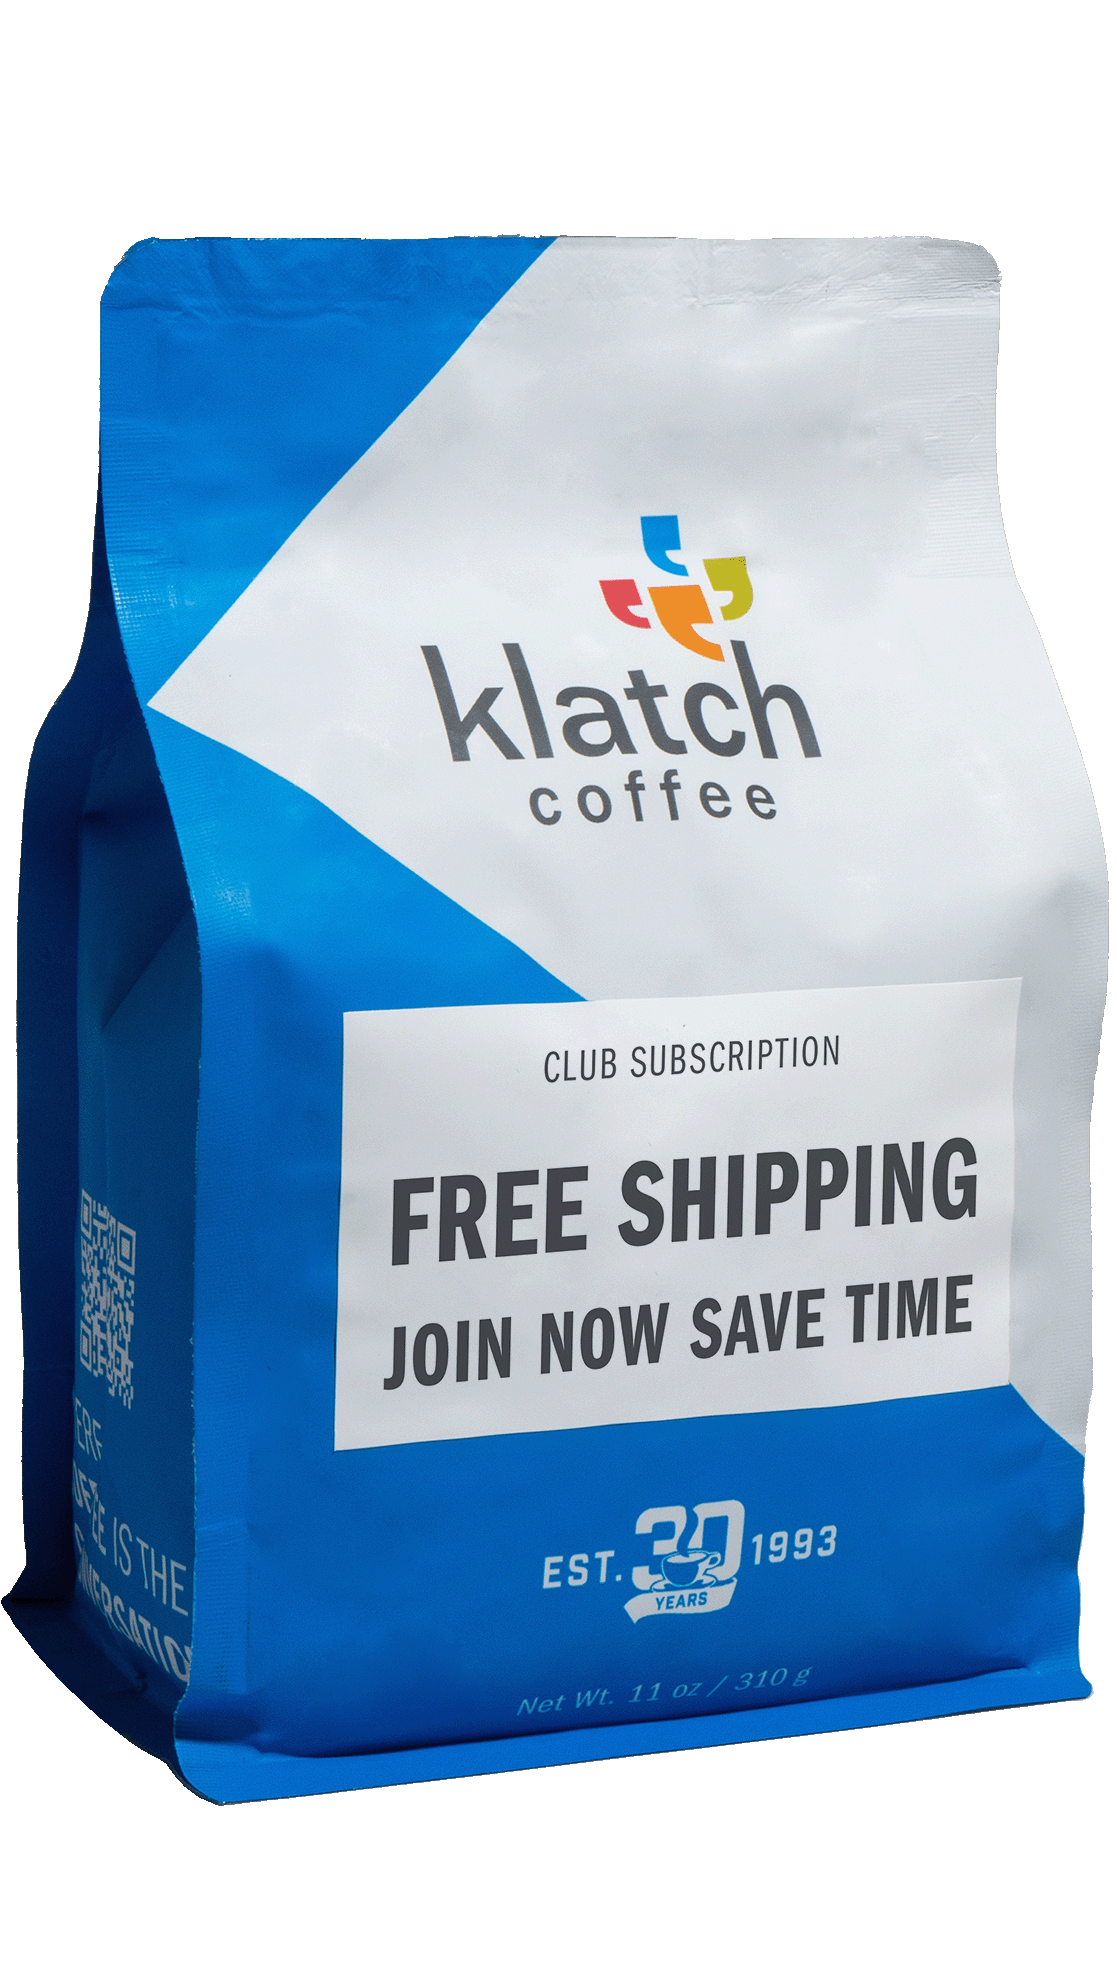 Coffee Bag with Free Shipping on Label